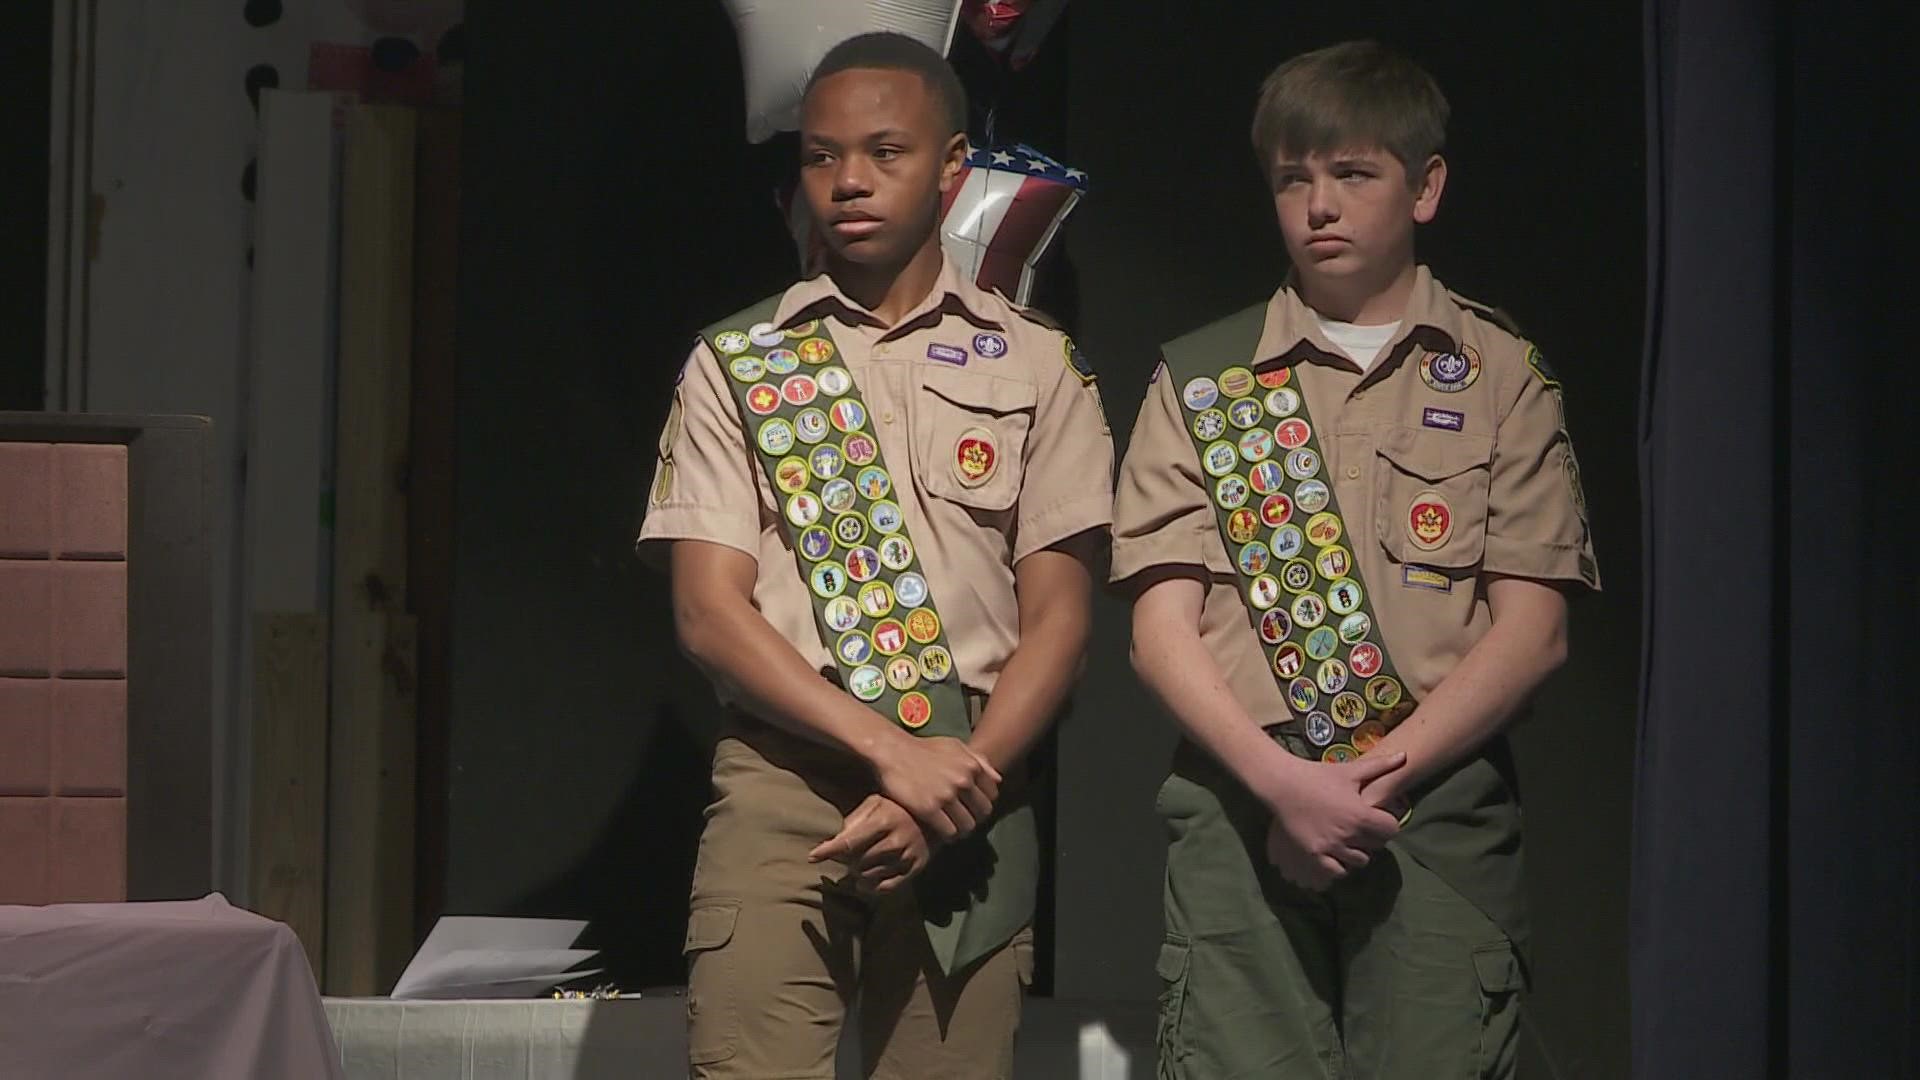 Two New Orleans teens earn Eagle Scout titles after years of hard